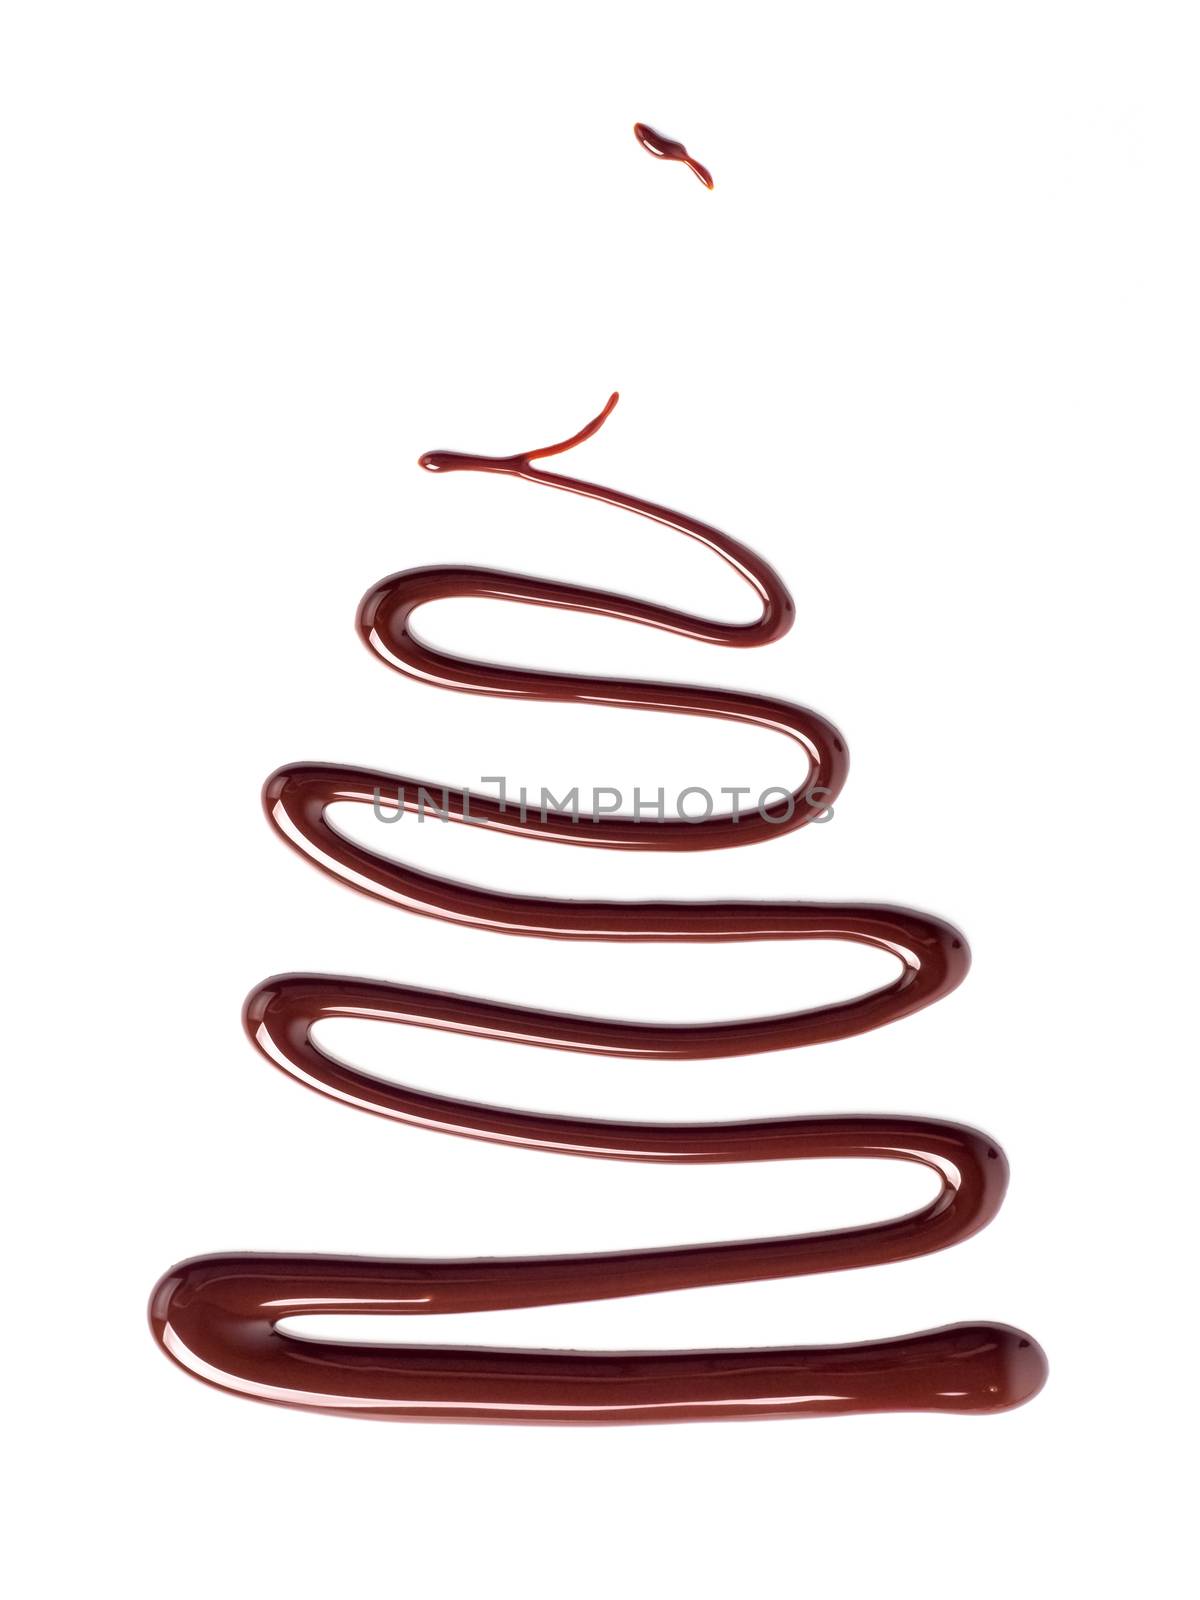 Chocolate sauce on white. Abstract lines made of chocolate or soy sauce isolated on white background